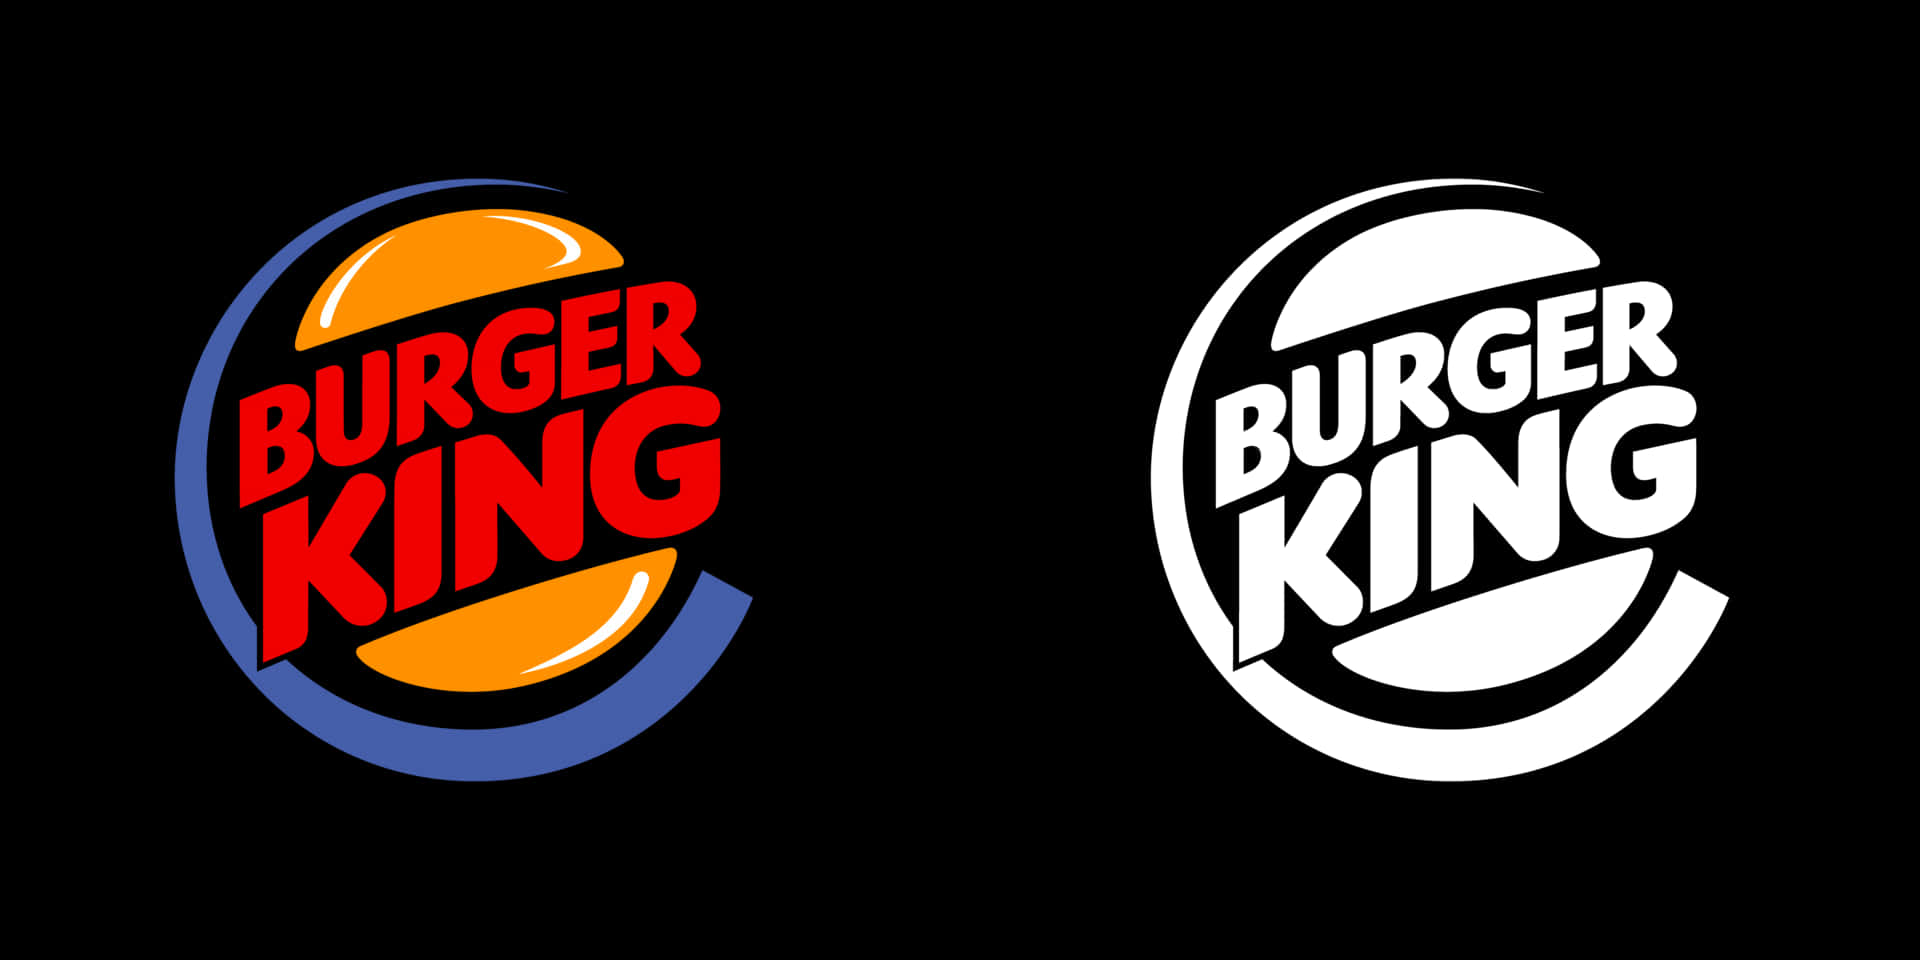 Fresh and tasty food for your lunch - Burger King